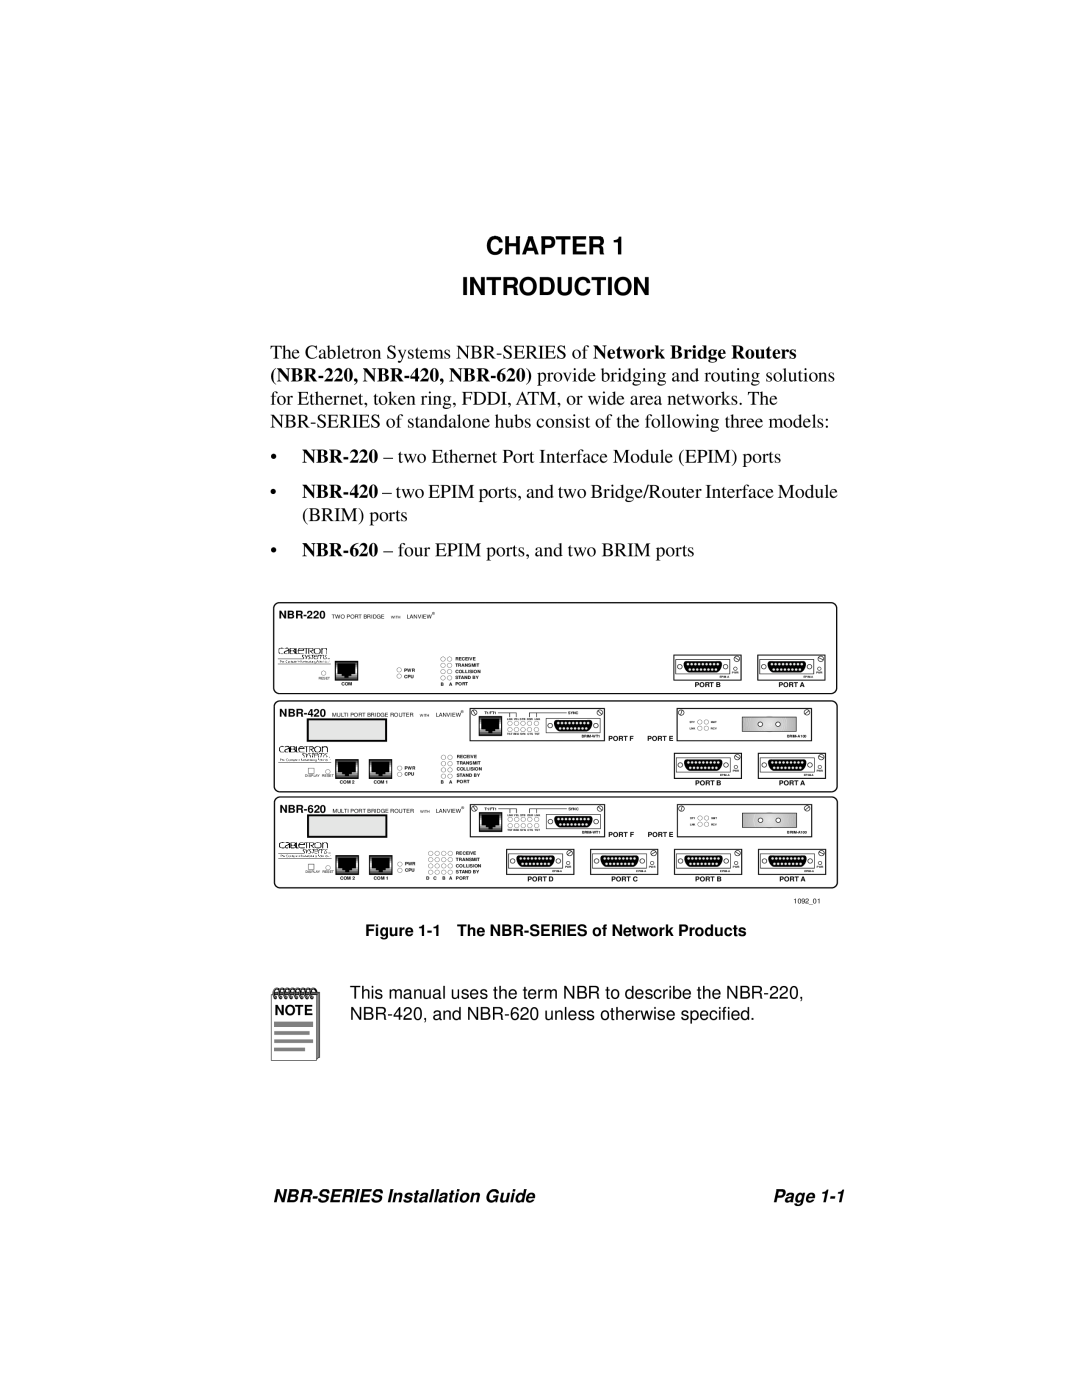 Cabletron Systems NBR-420 Chapter Introduction, NBR-SERIES Installation Guide, Page, 1 The NBR-SERIES of Network Products 